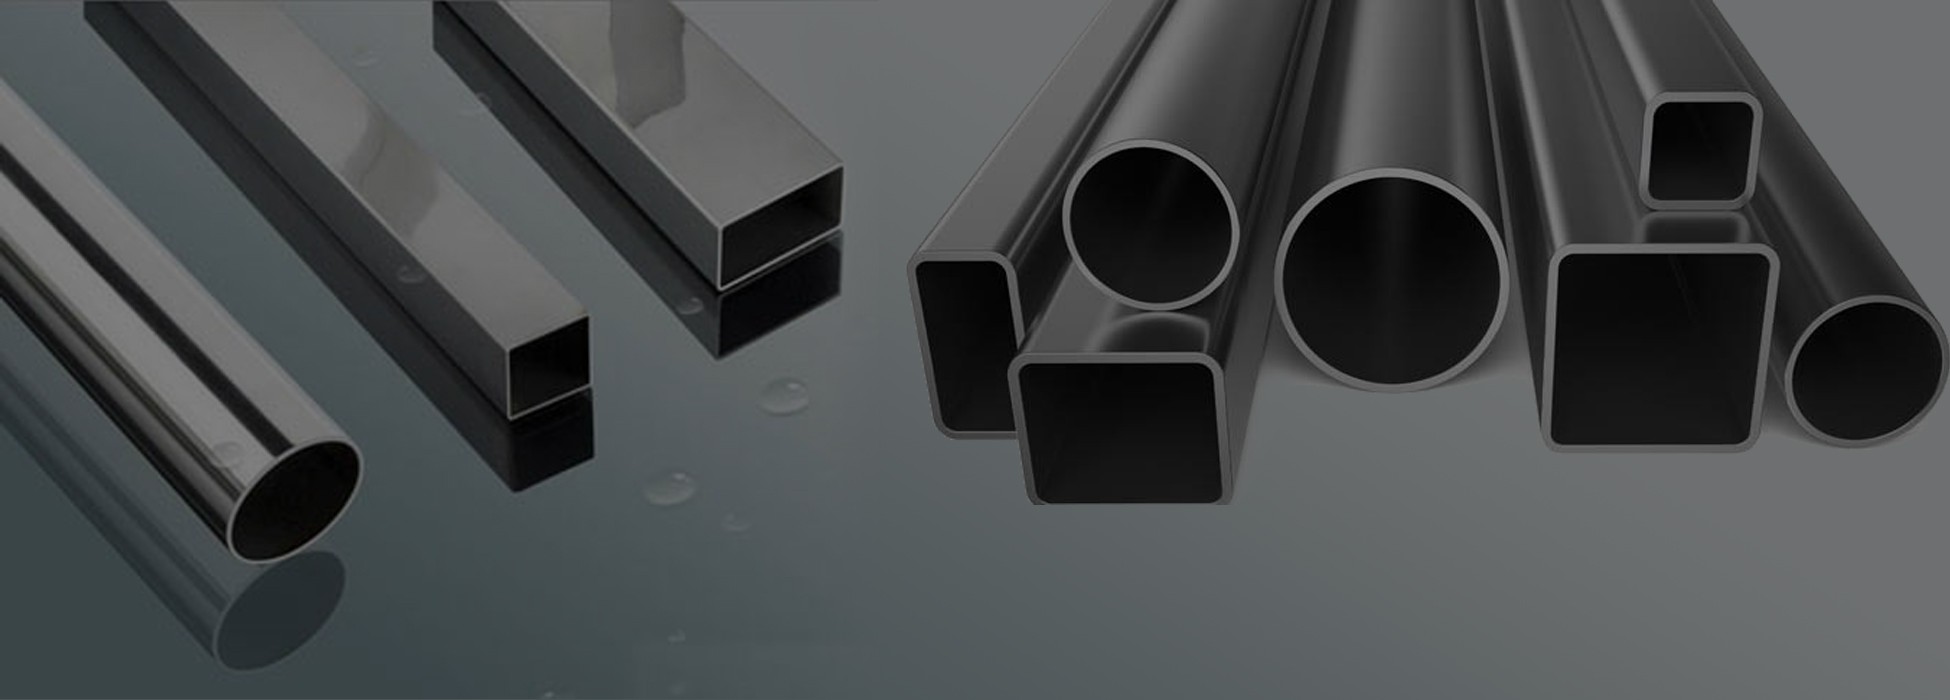 Stainless Steel Tubes, Stainless Steel Pipes, Square S.S.Tubes, S.S.Tubes, SS Tubes, SS Pipes